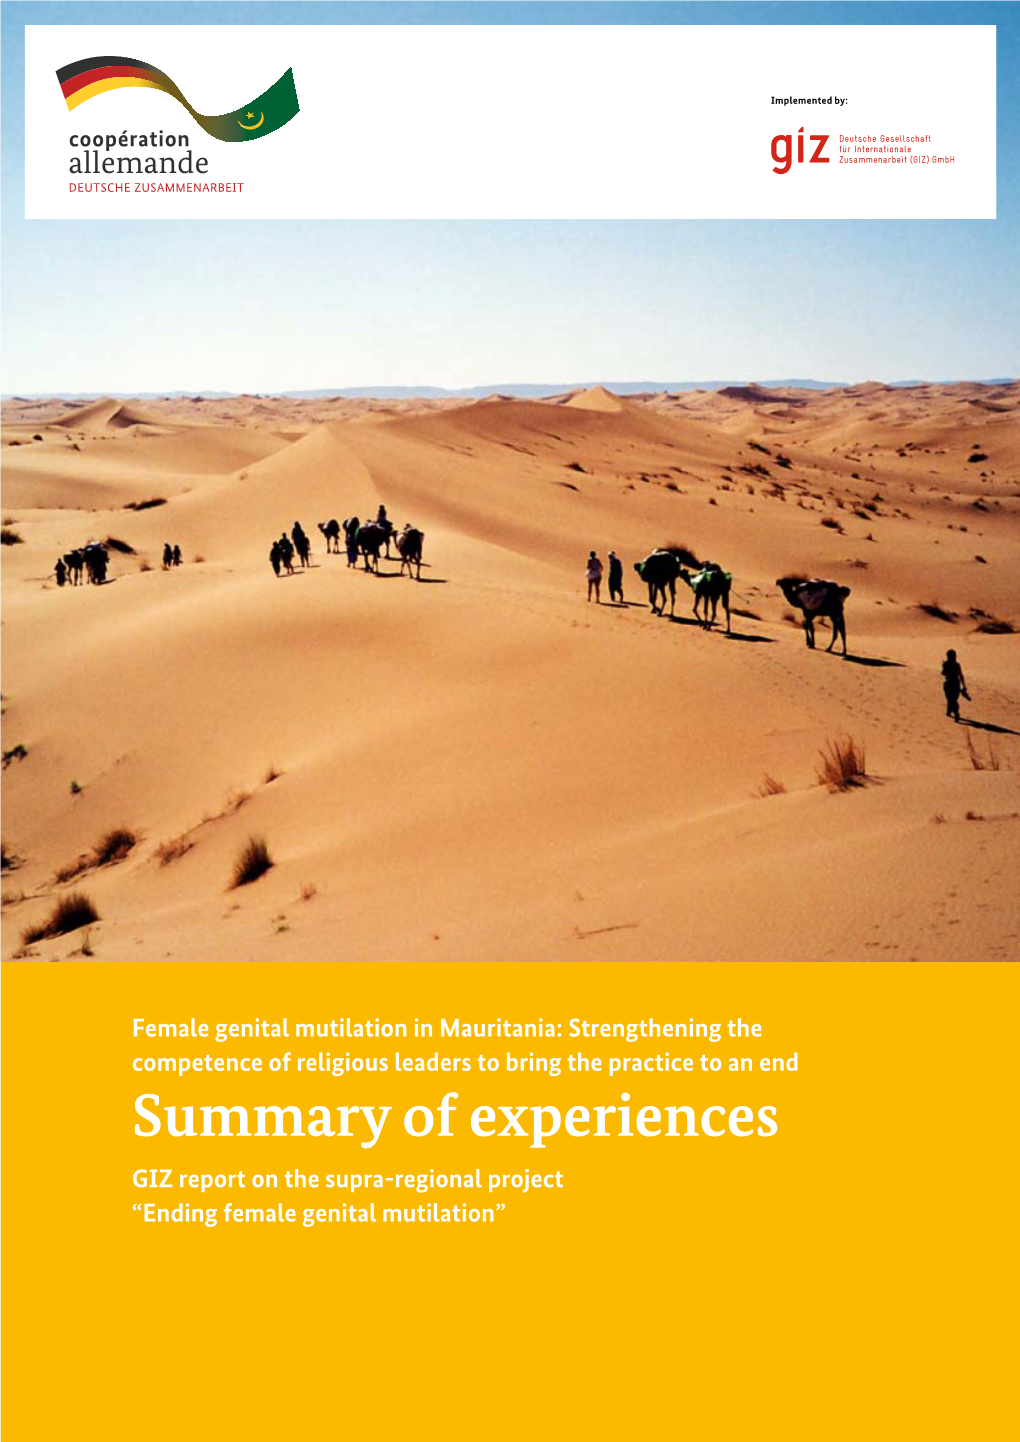 Summary of Experiences GIZ Report on the Supra-Regional Project “Ending Female Genital Mutilation”